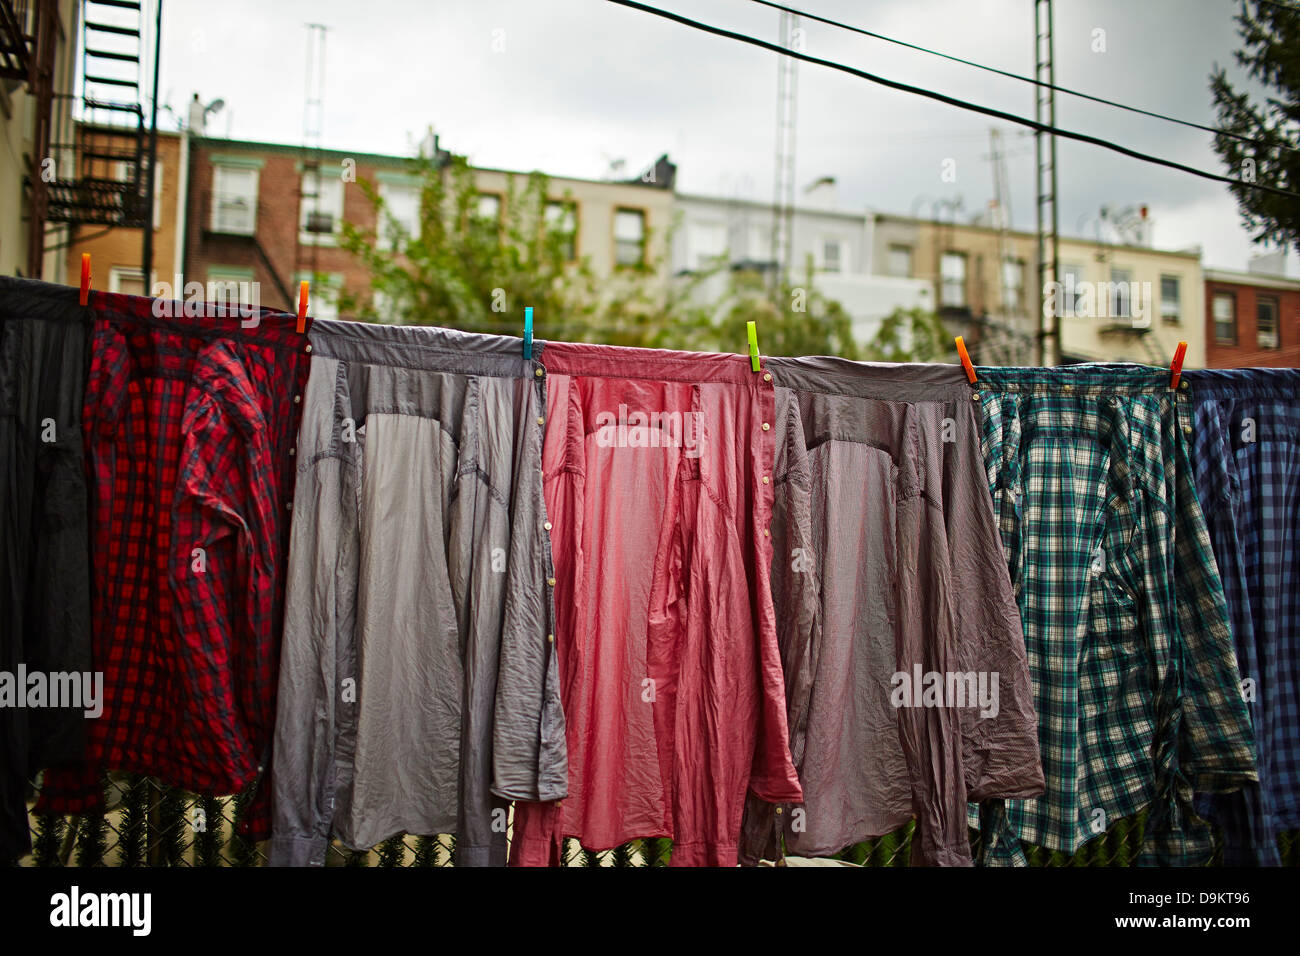 Shirts hanging on clothes line Banque D'Images